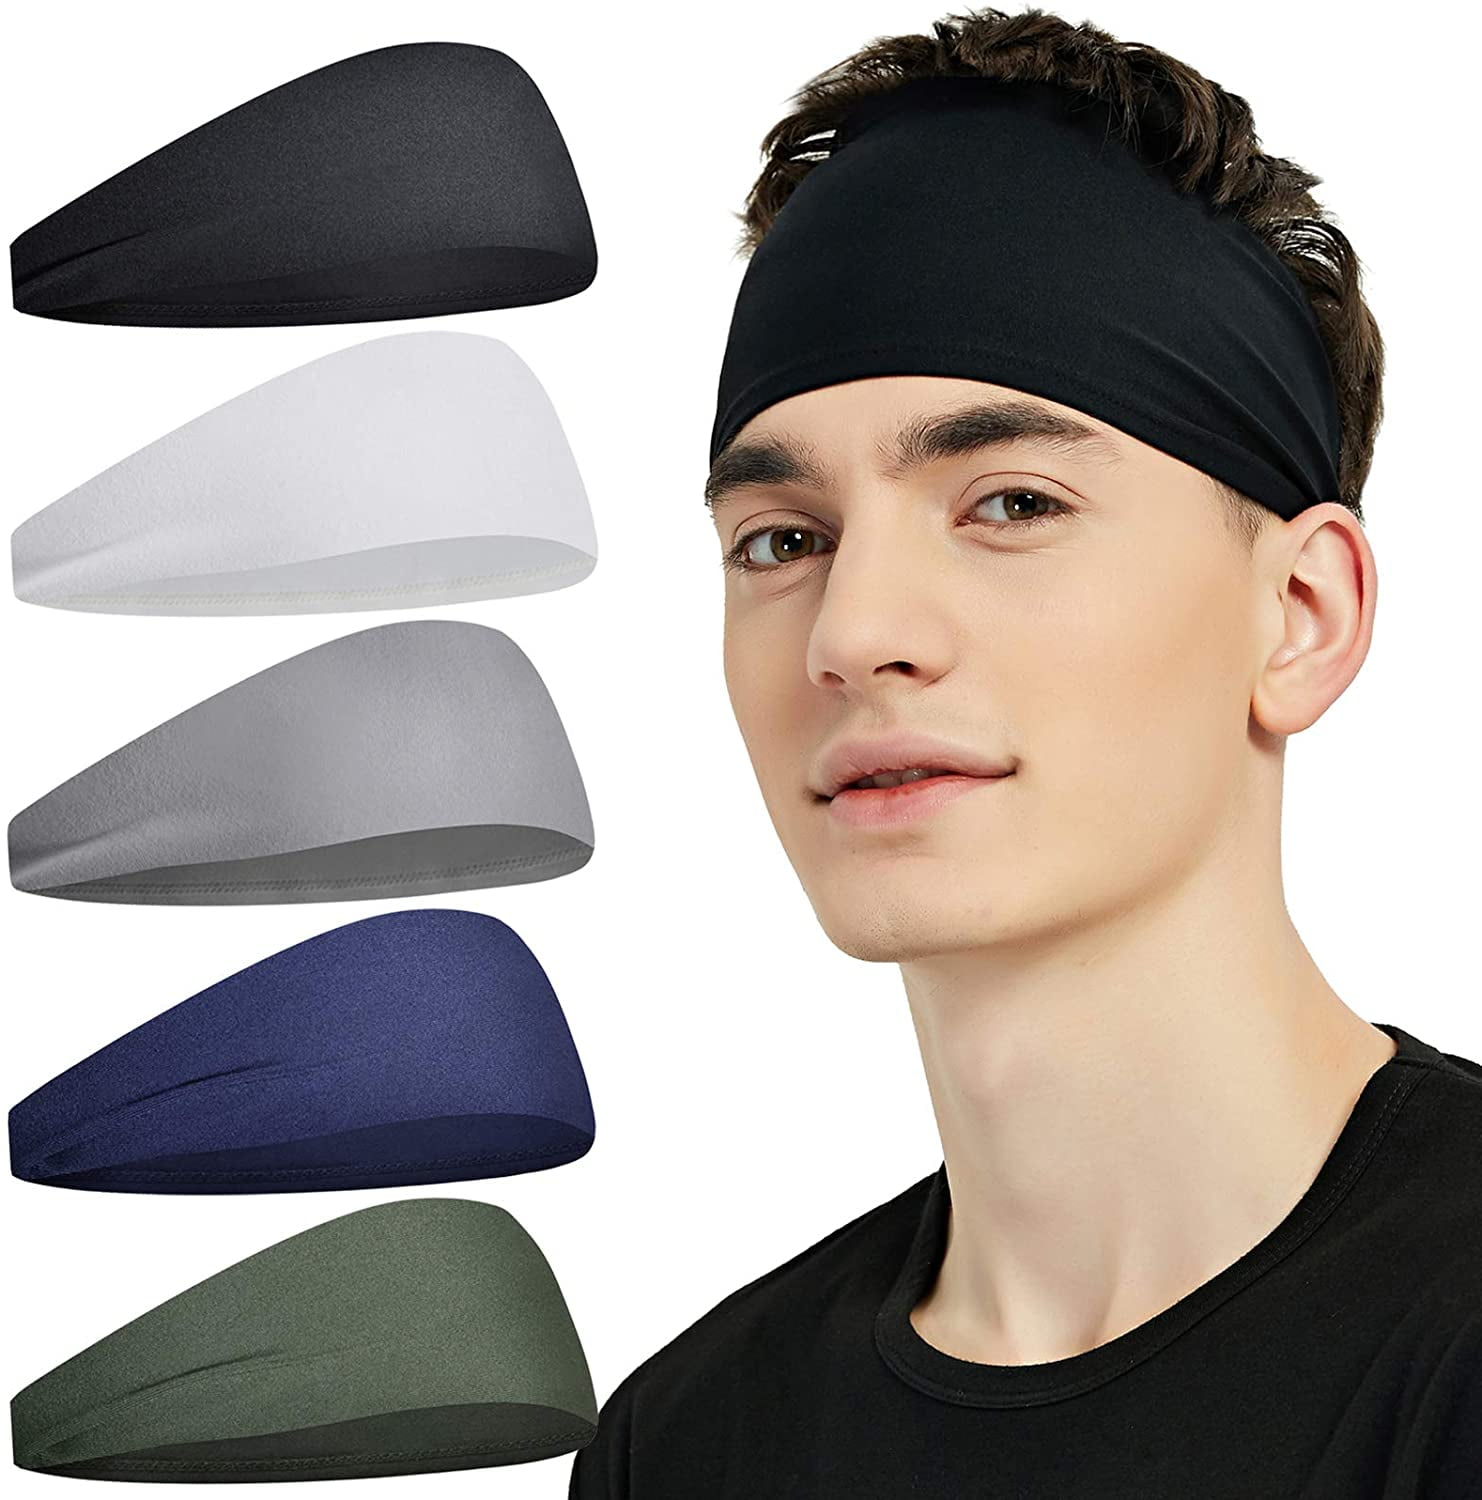 Sweat Band Sport Headband Stretch Hairband Cooling Headbands for Men Sports Running Cycling Hot Yoga and Athletic Workouts 